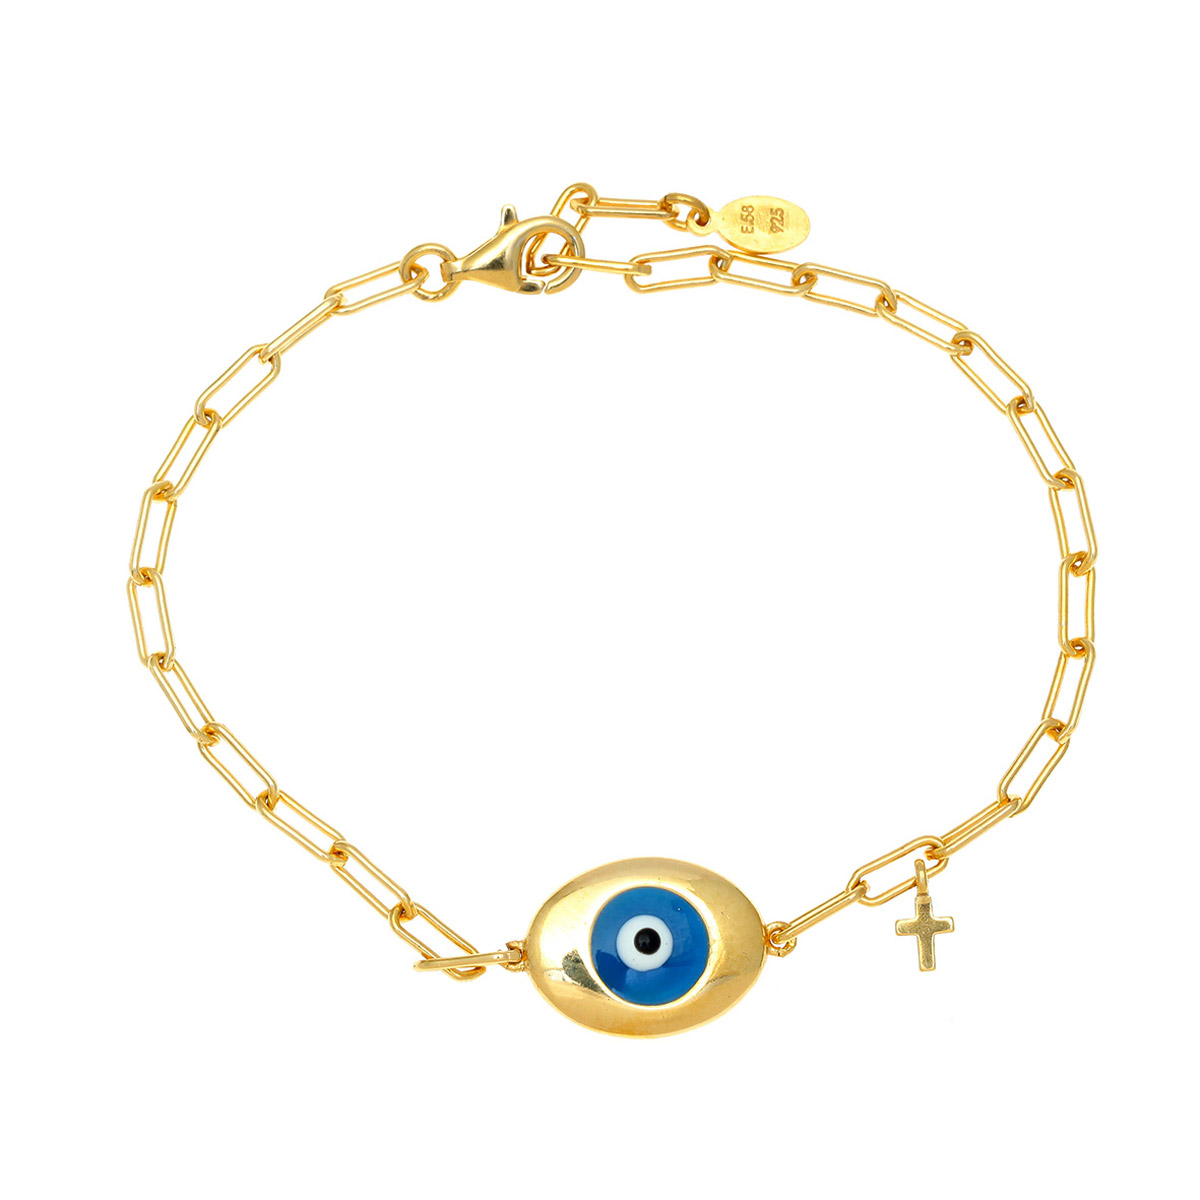 GREGIO Bracelet Silver 925 Gold Plated with Blue Evil Eye